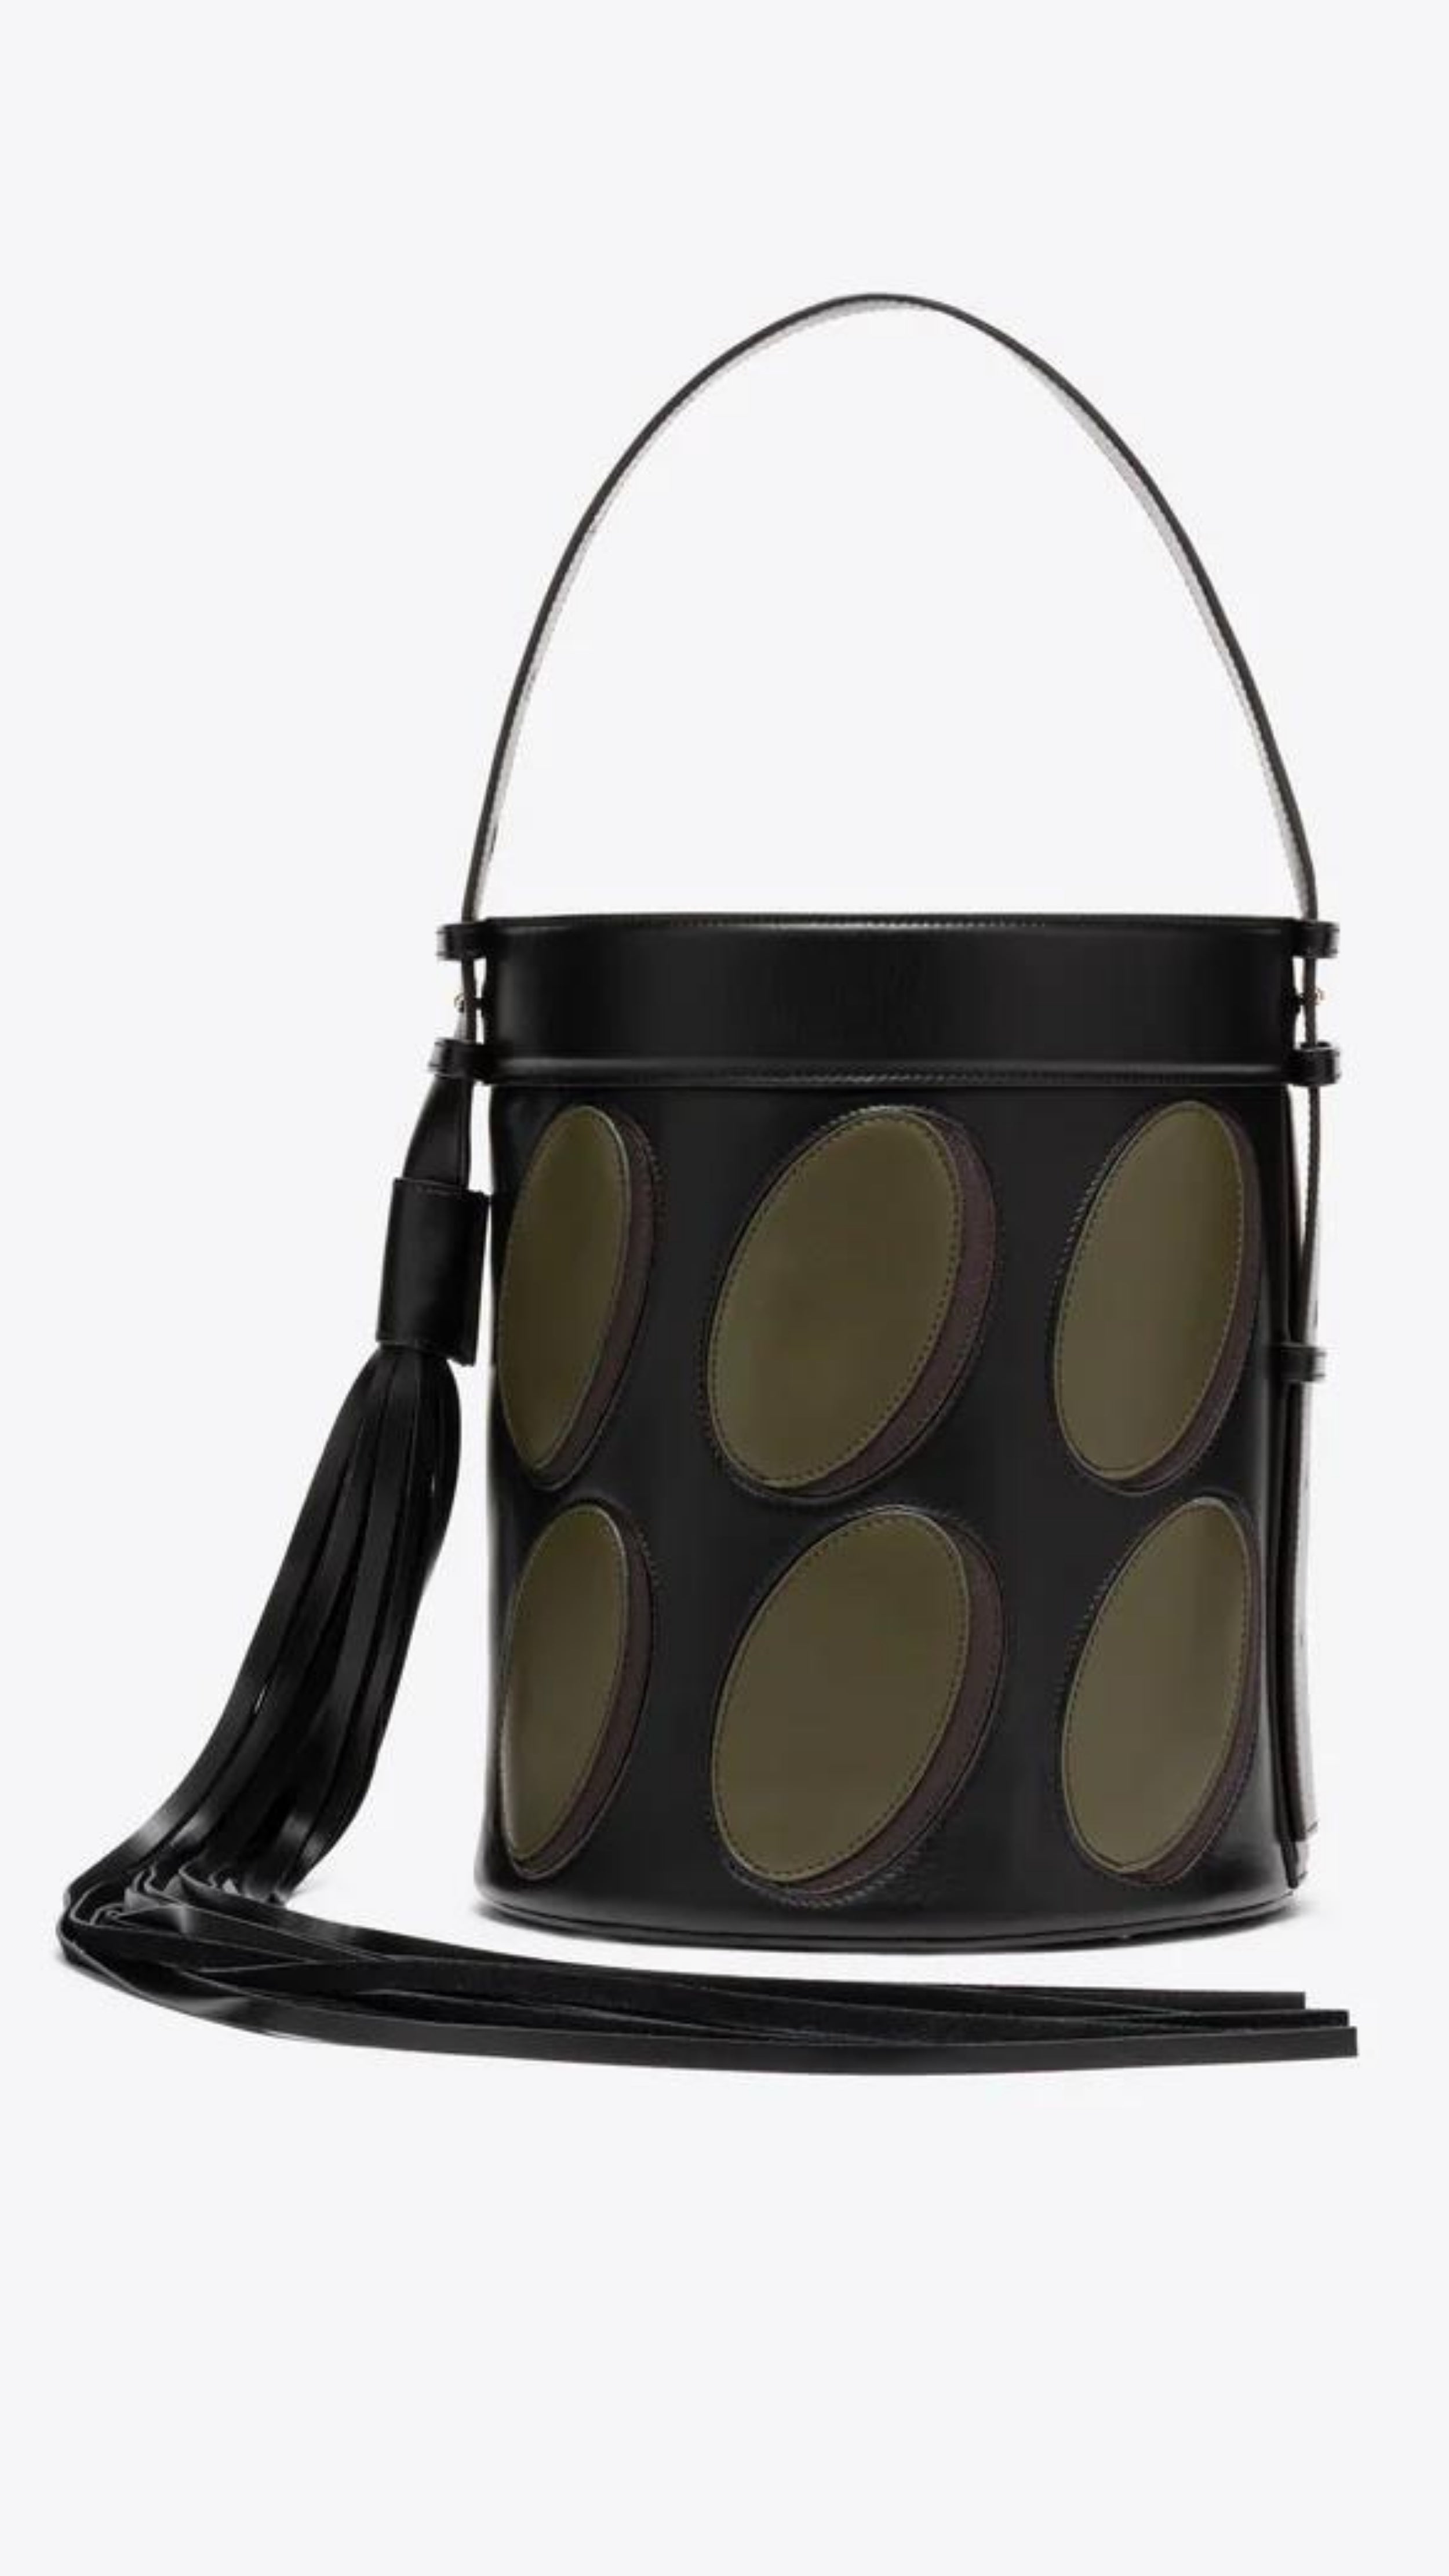 AZ Factory Colville Molly Molloy Lucinda Chambers,  Leather Patchwork Midi Bucket Bag.. Black oval bucket back in black leather with olive green ovals patches. Has an adjustable black handle and a dramatic oversize black leather tassel. Product shown from the front.